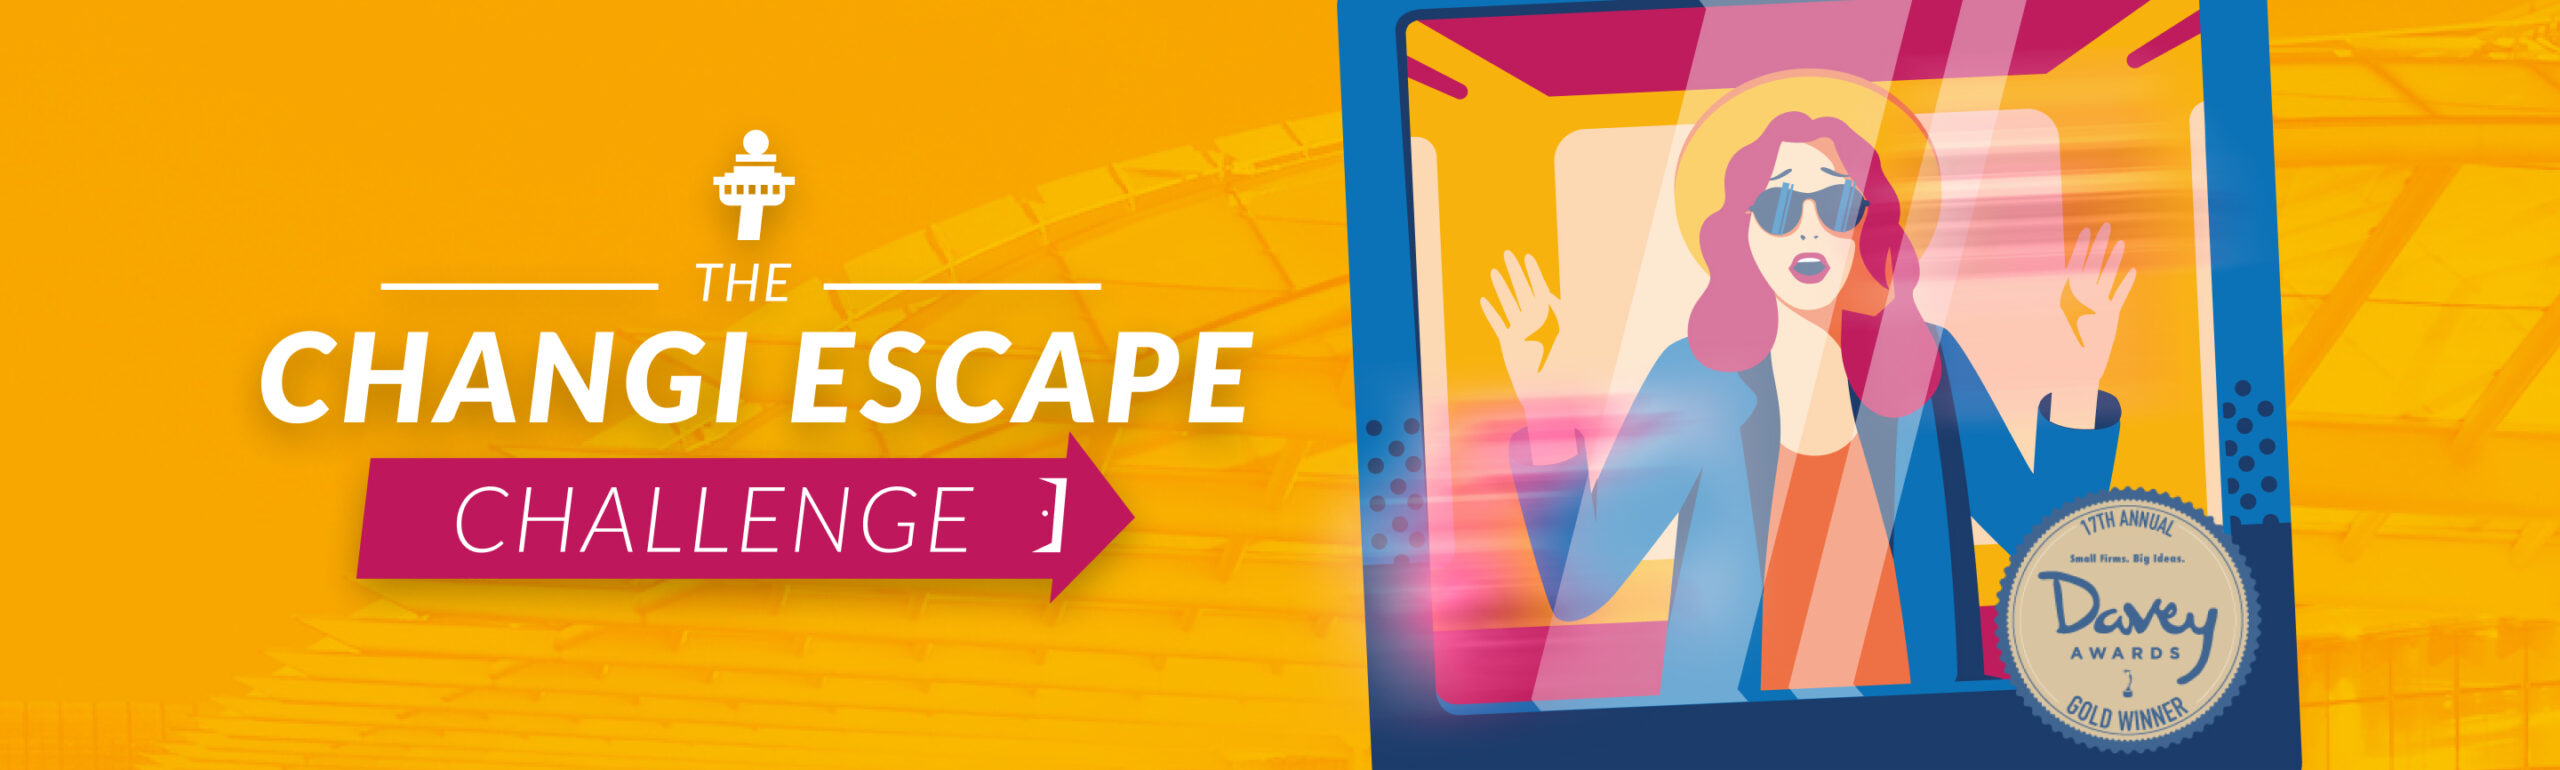 Orange background with The Changi Escape Challenge logo on the left and woman with pink hair in a box on right